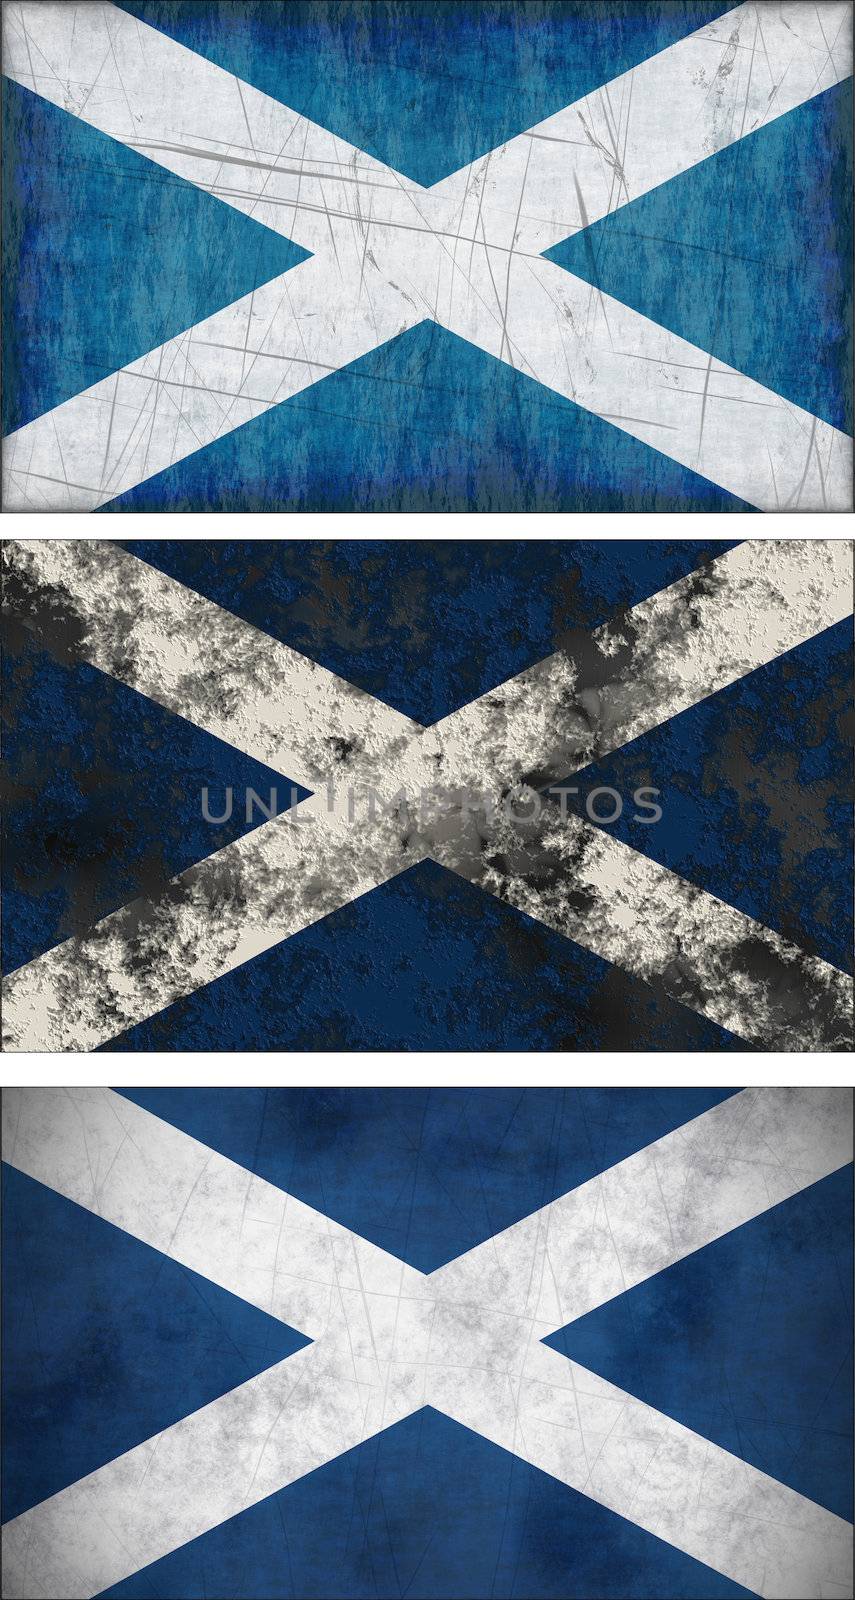 Great Image of the Flag of Scotland